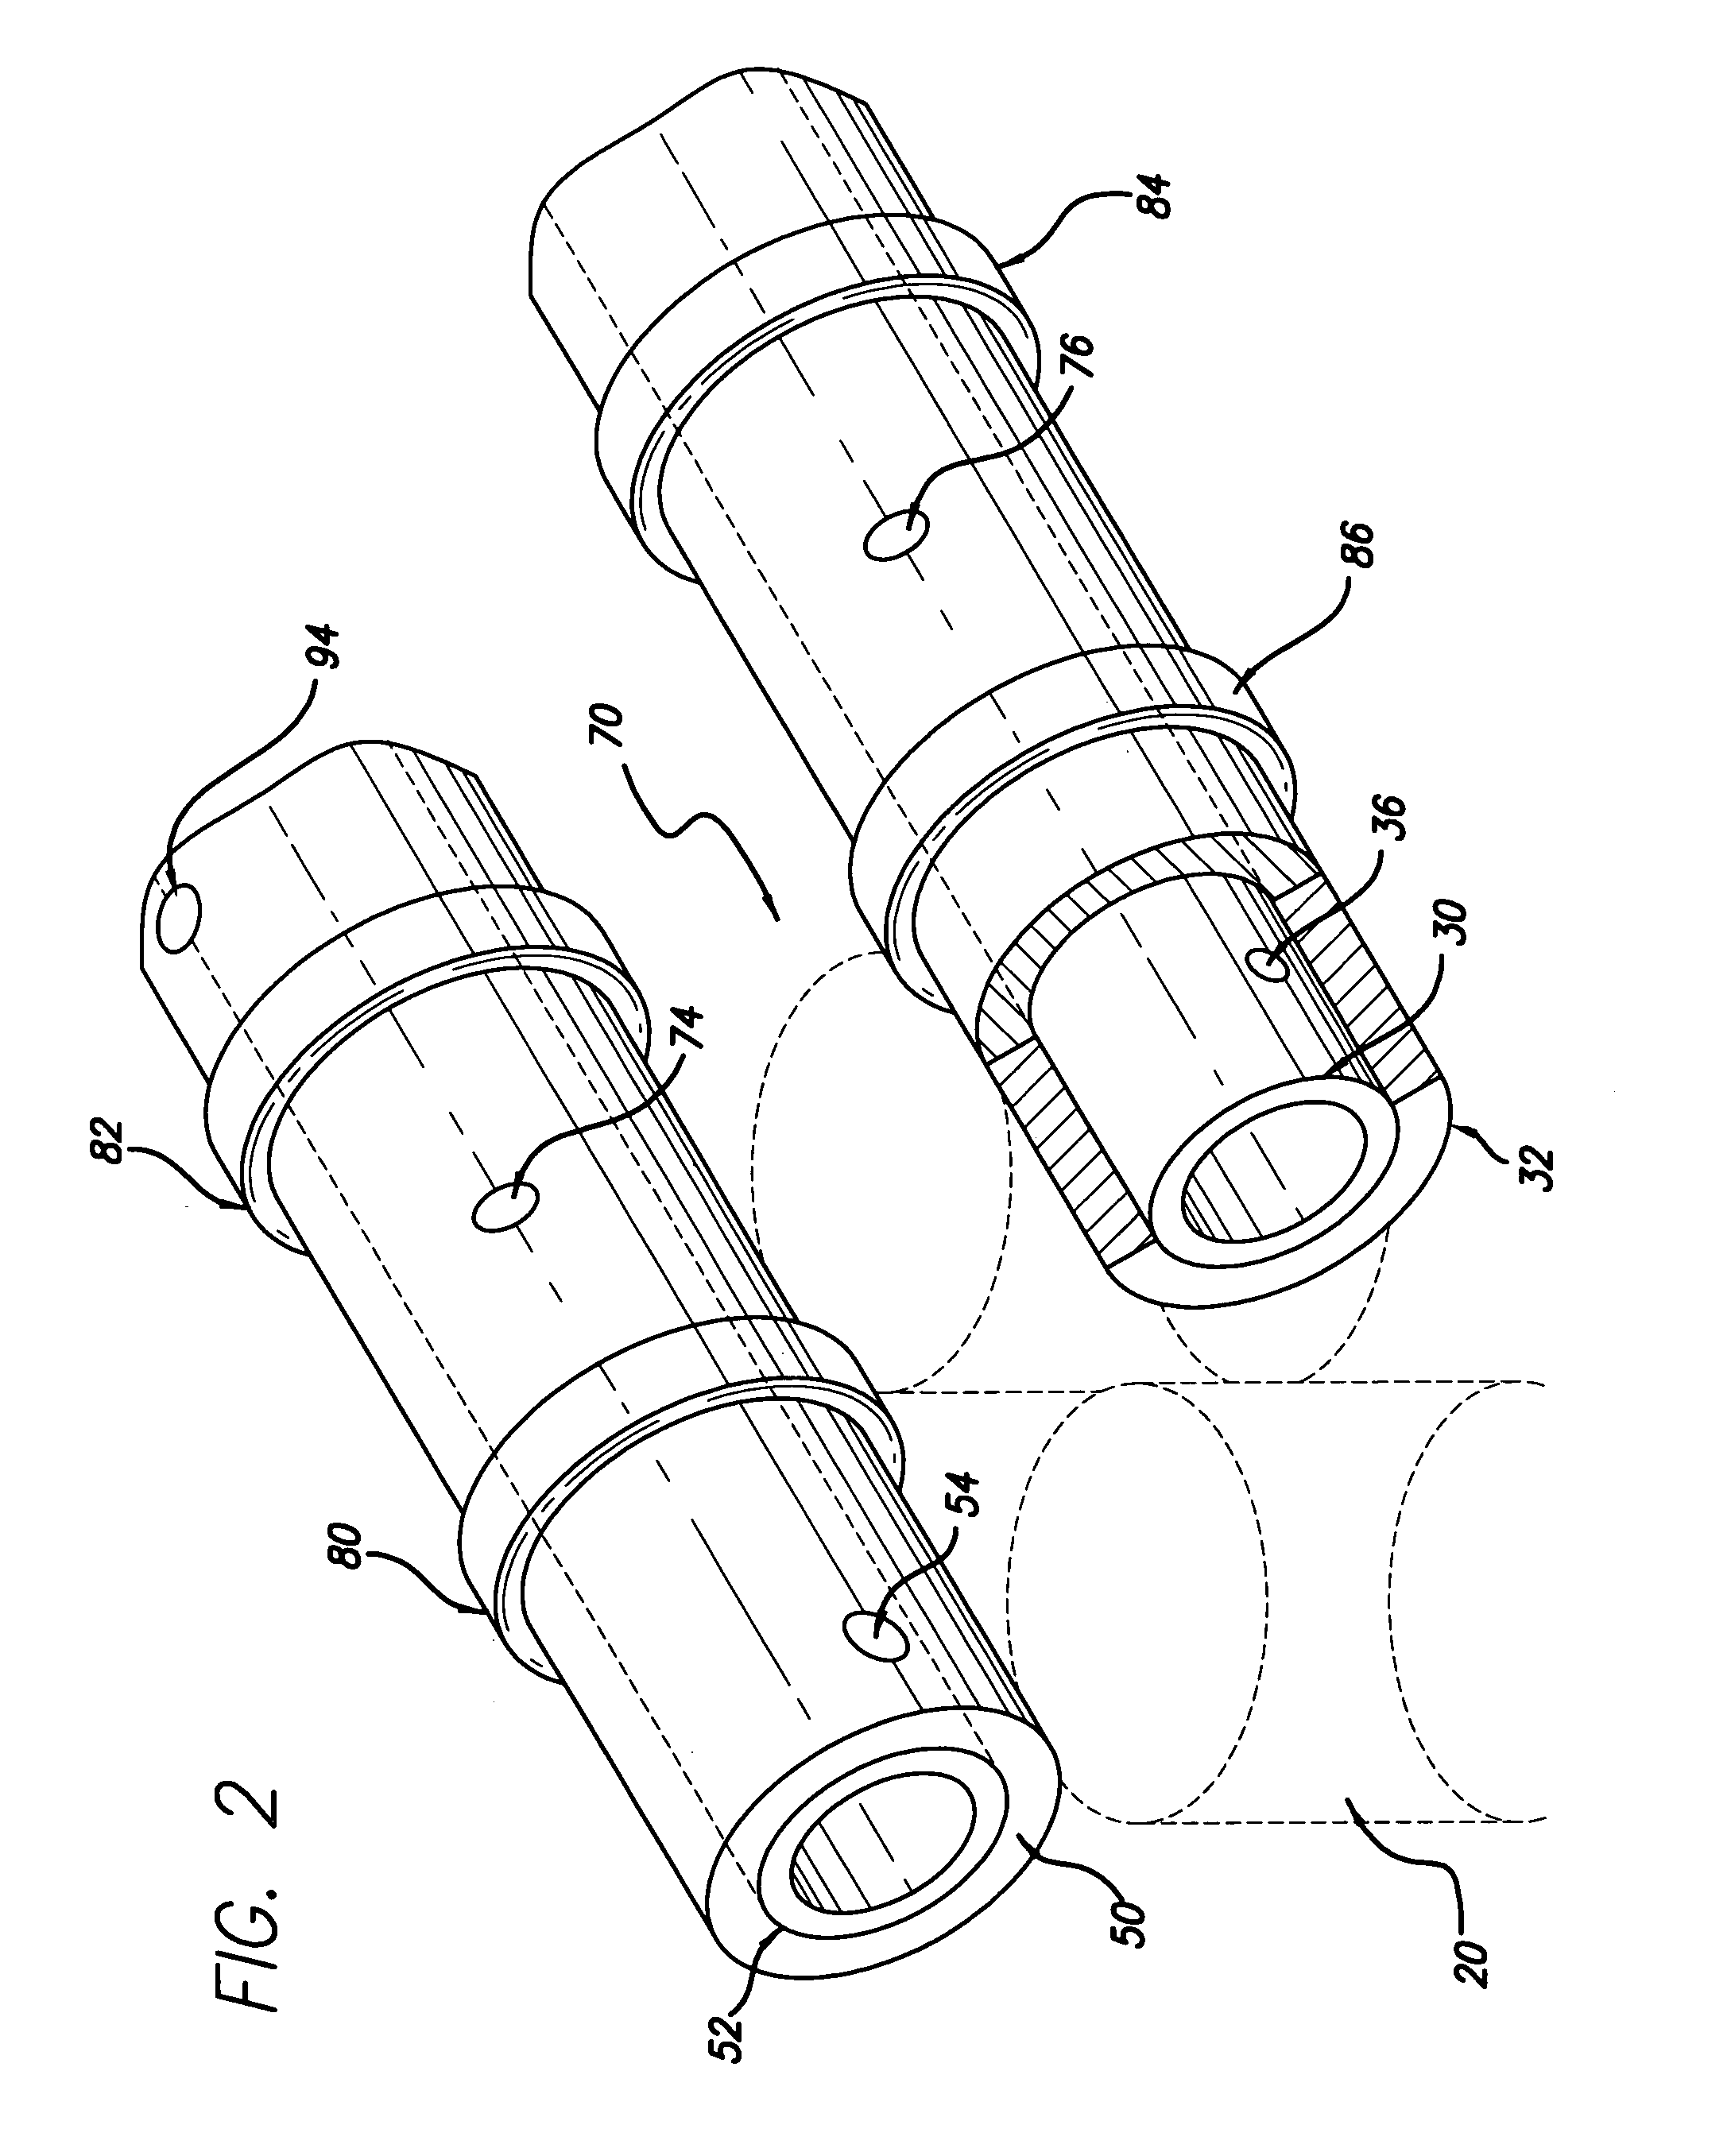 Slotted cylindrical tube rotary valve assembly